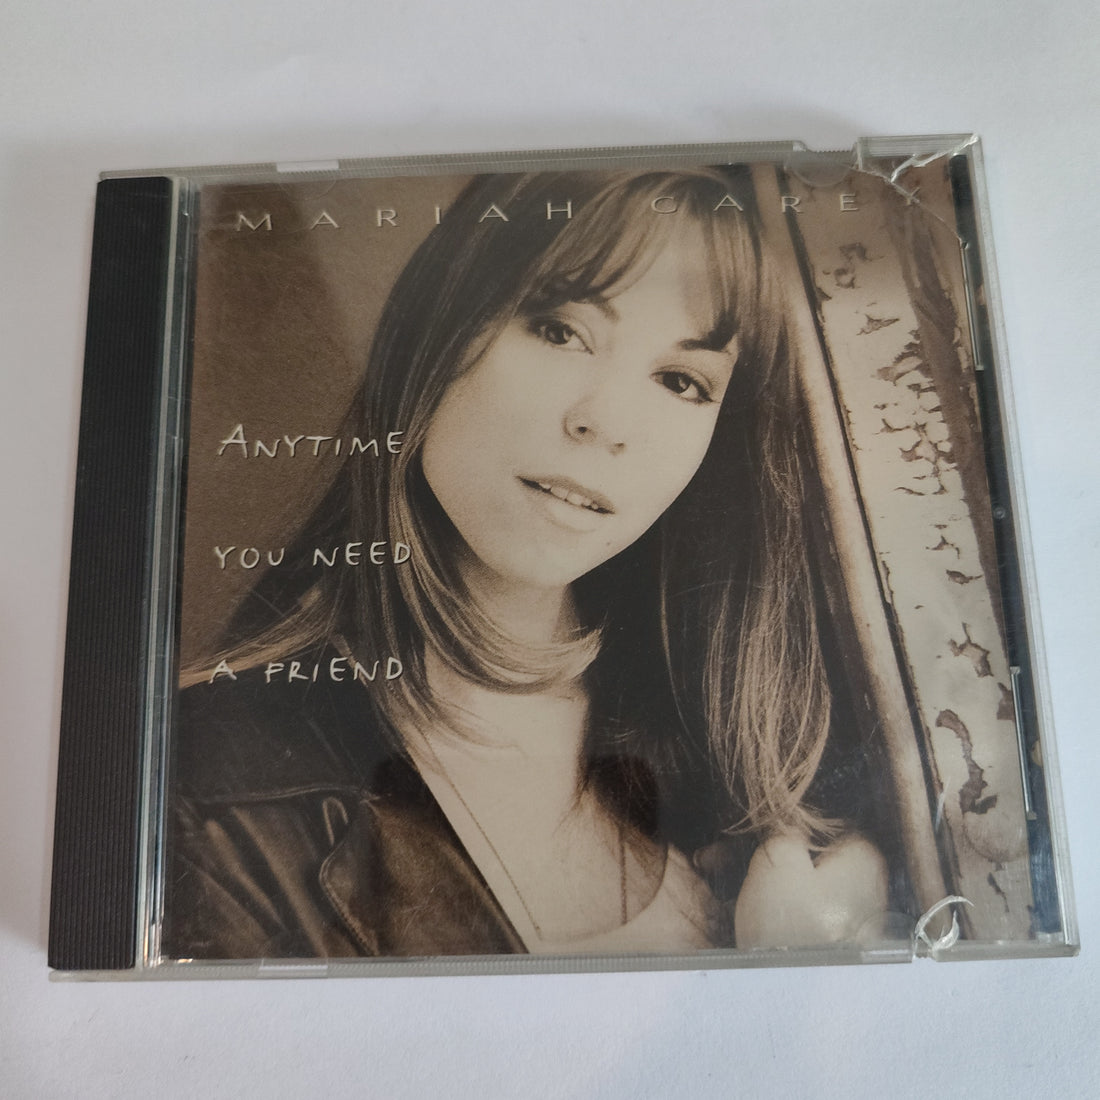 Mariah Carey - Anytime You Need A Friend (CD) (VG+)